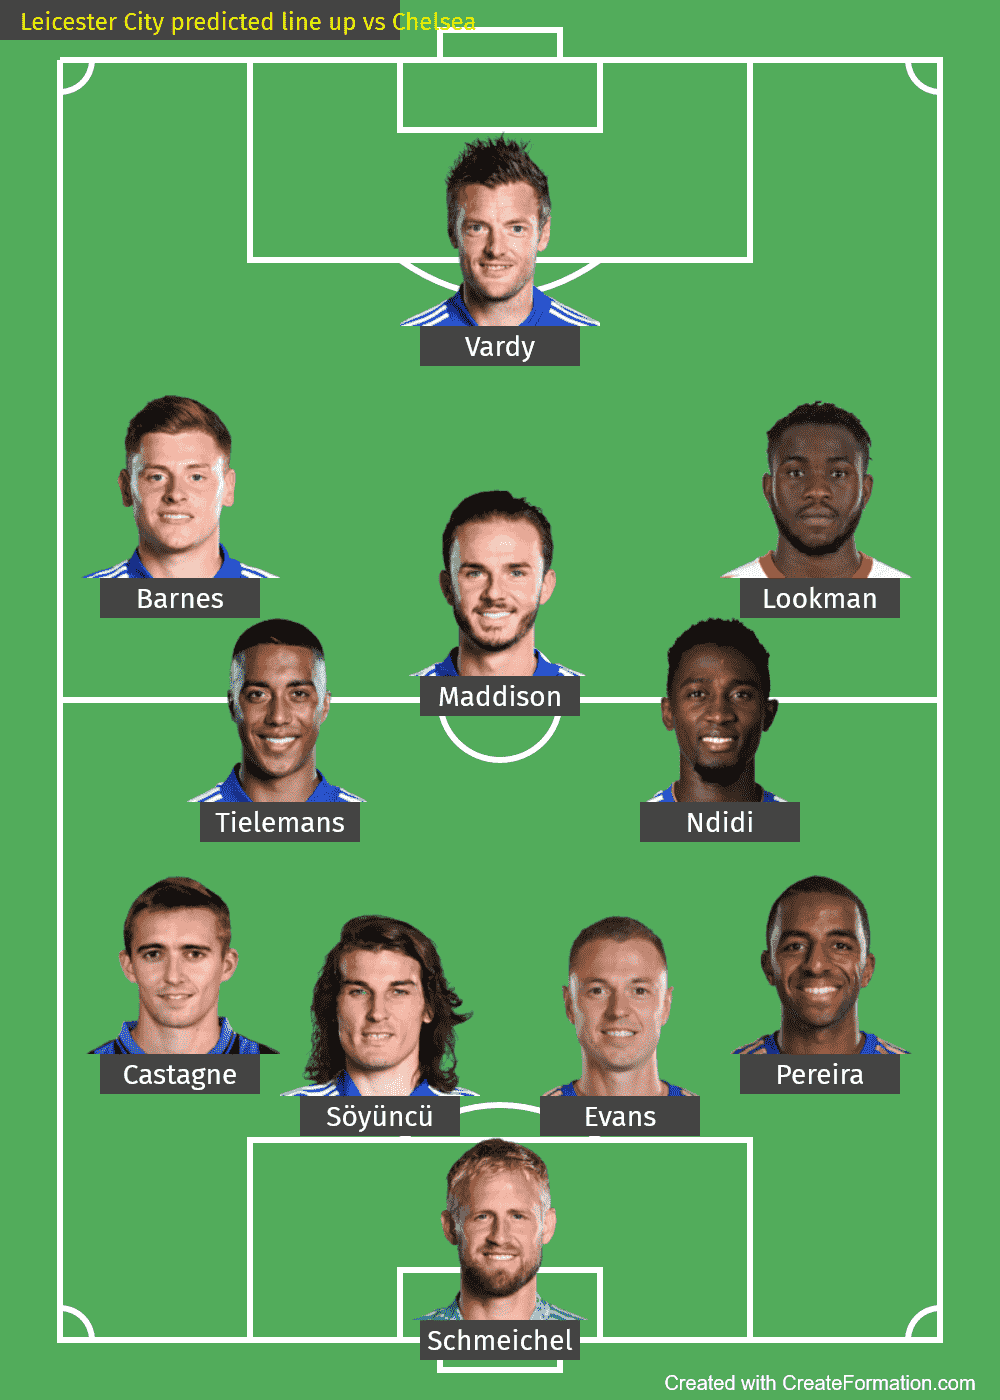 Leicester City predicted line up vs Chelsea